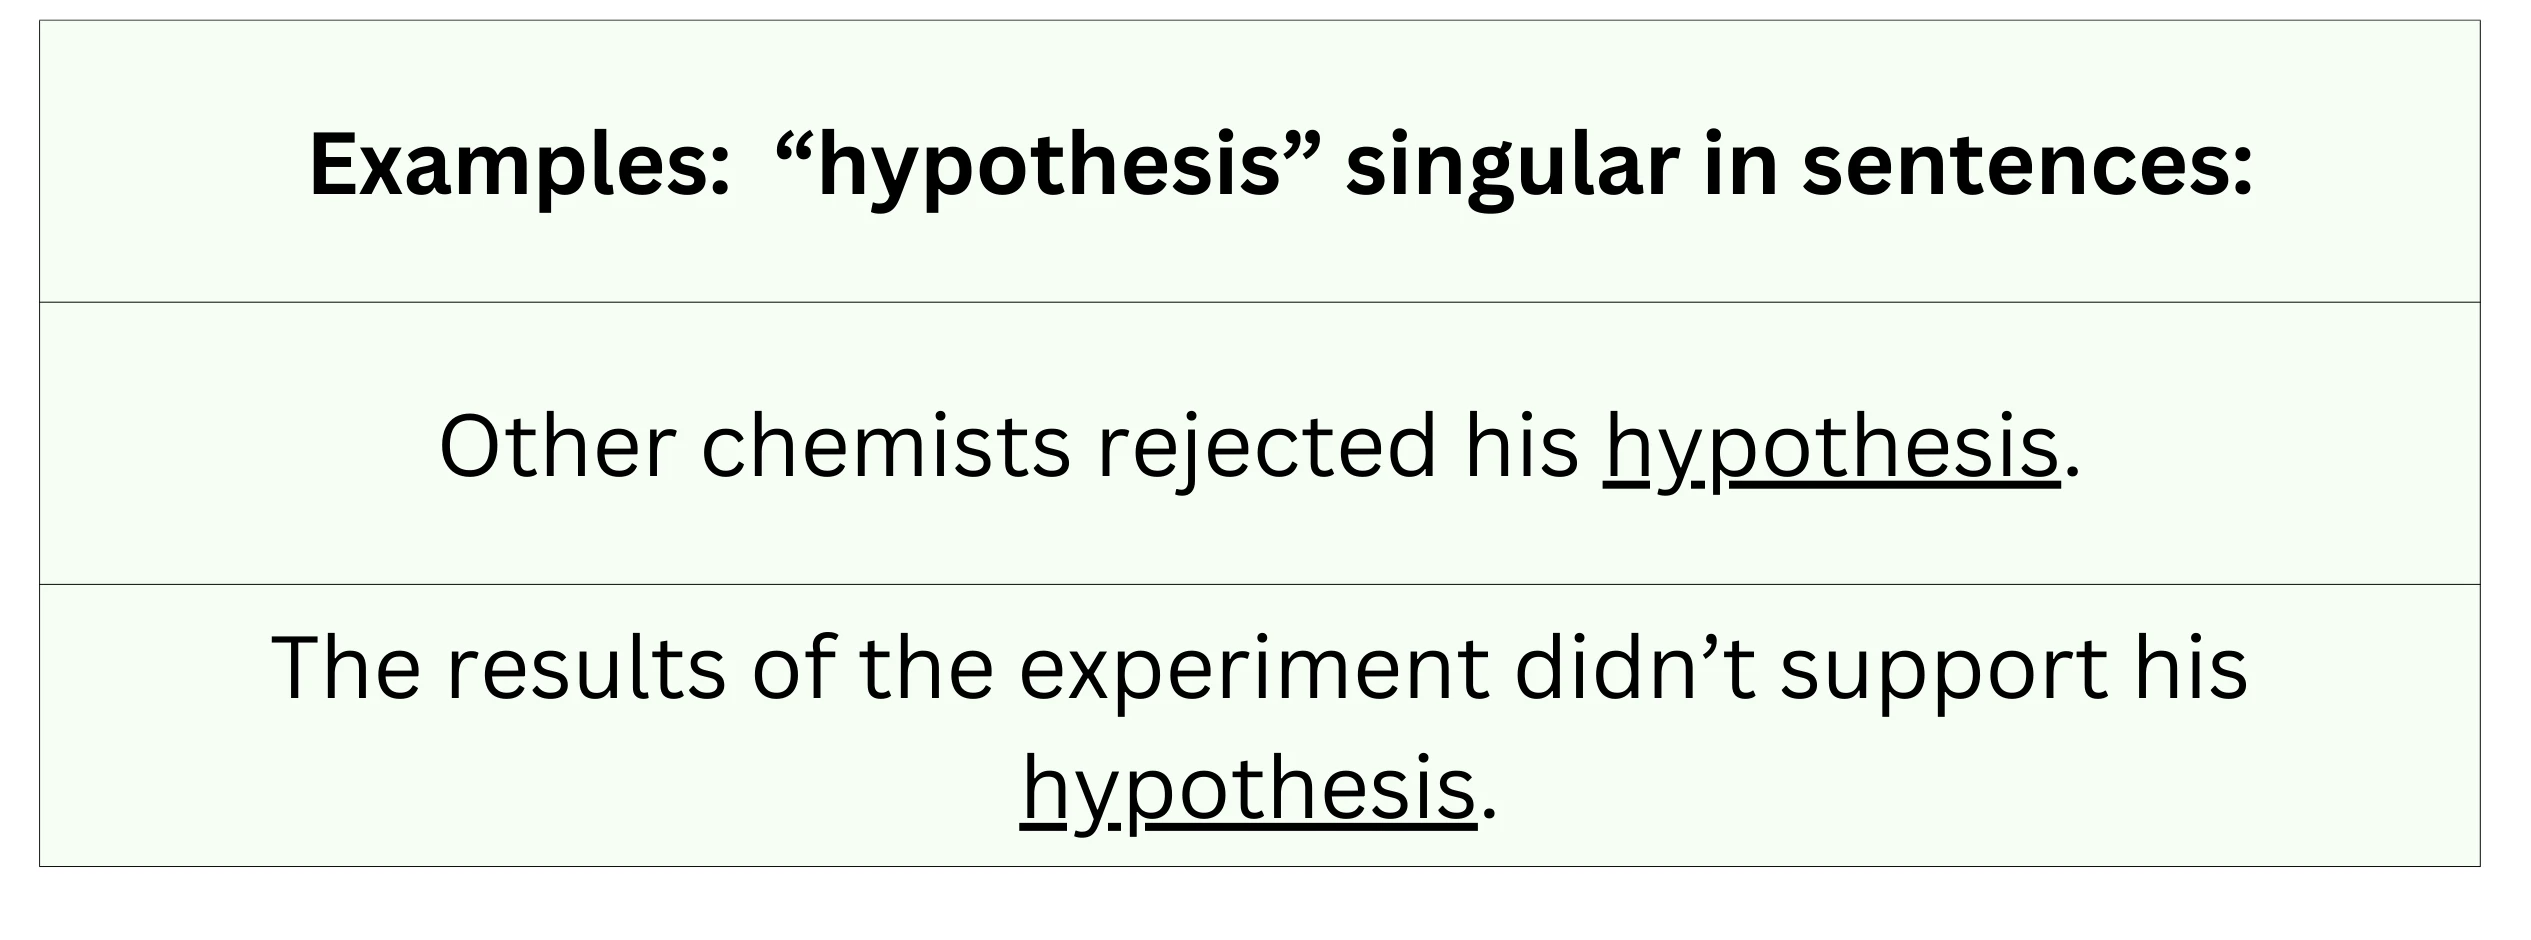 plural form of hypothesis is hypotheses